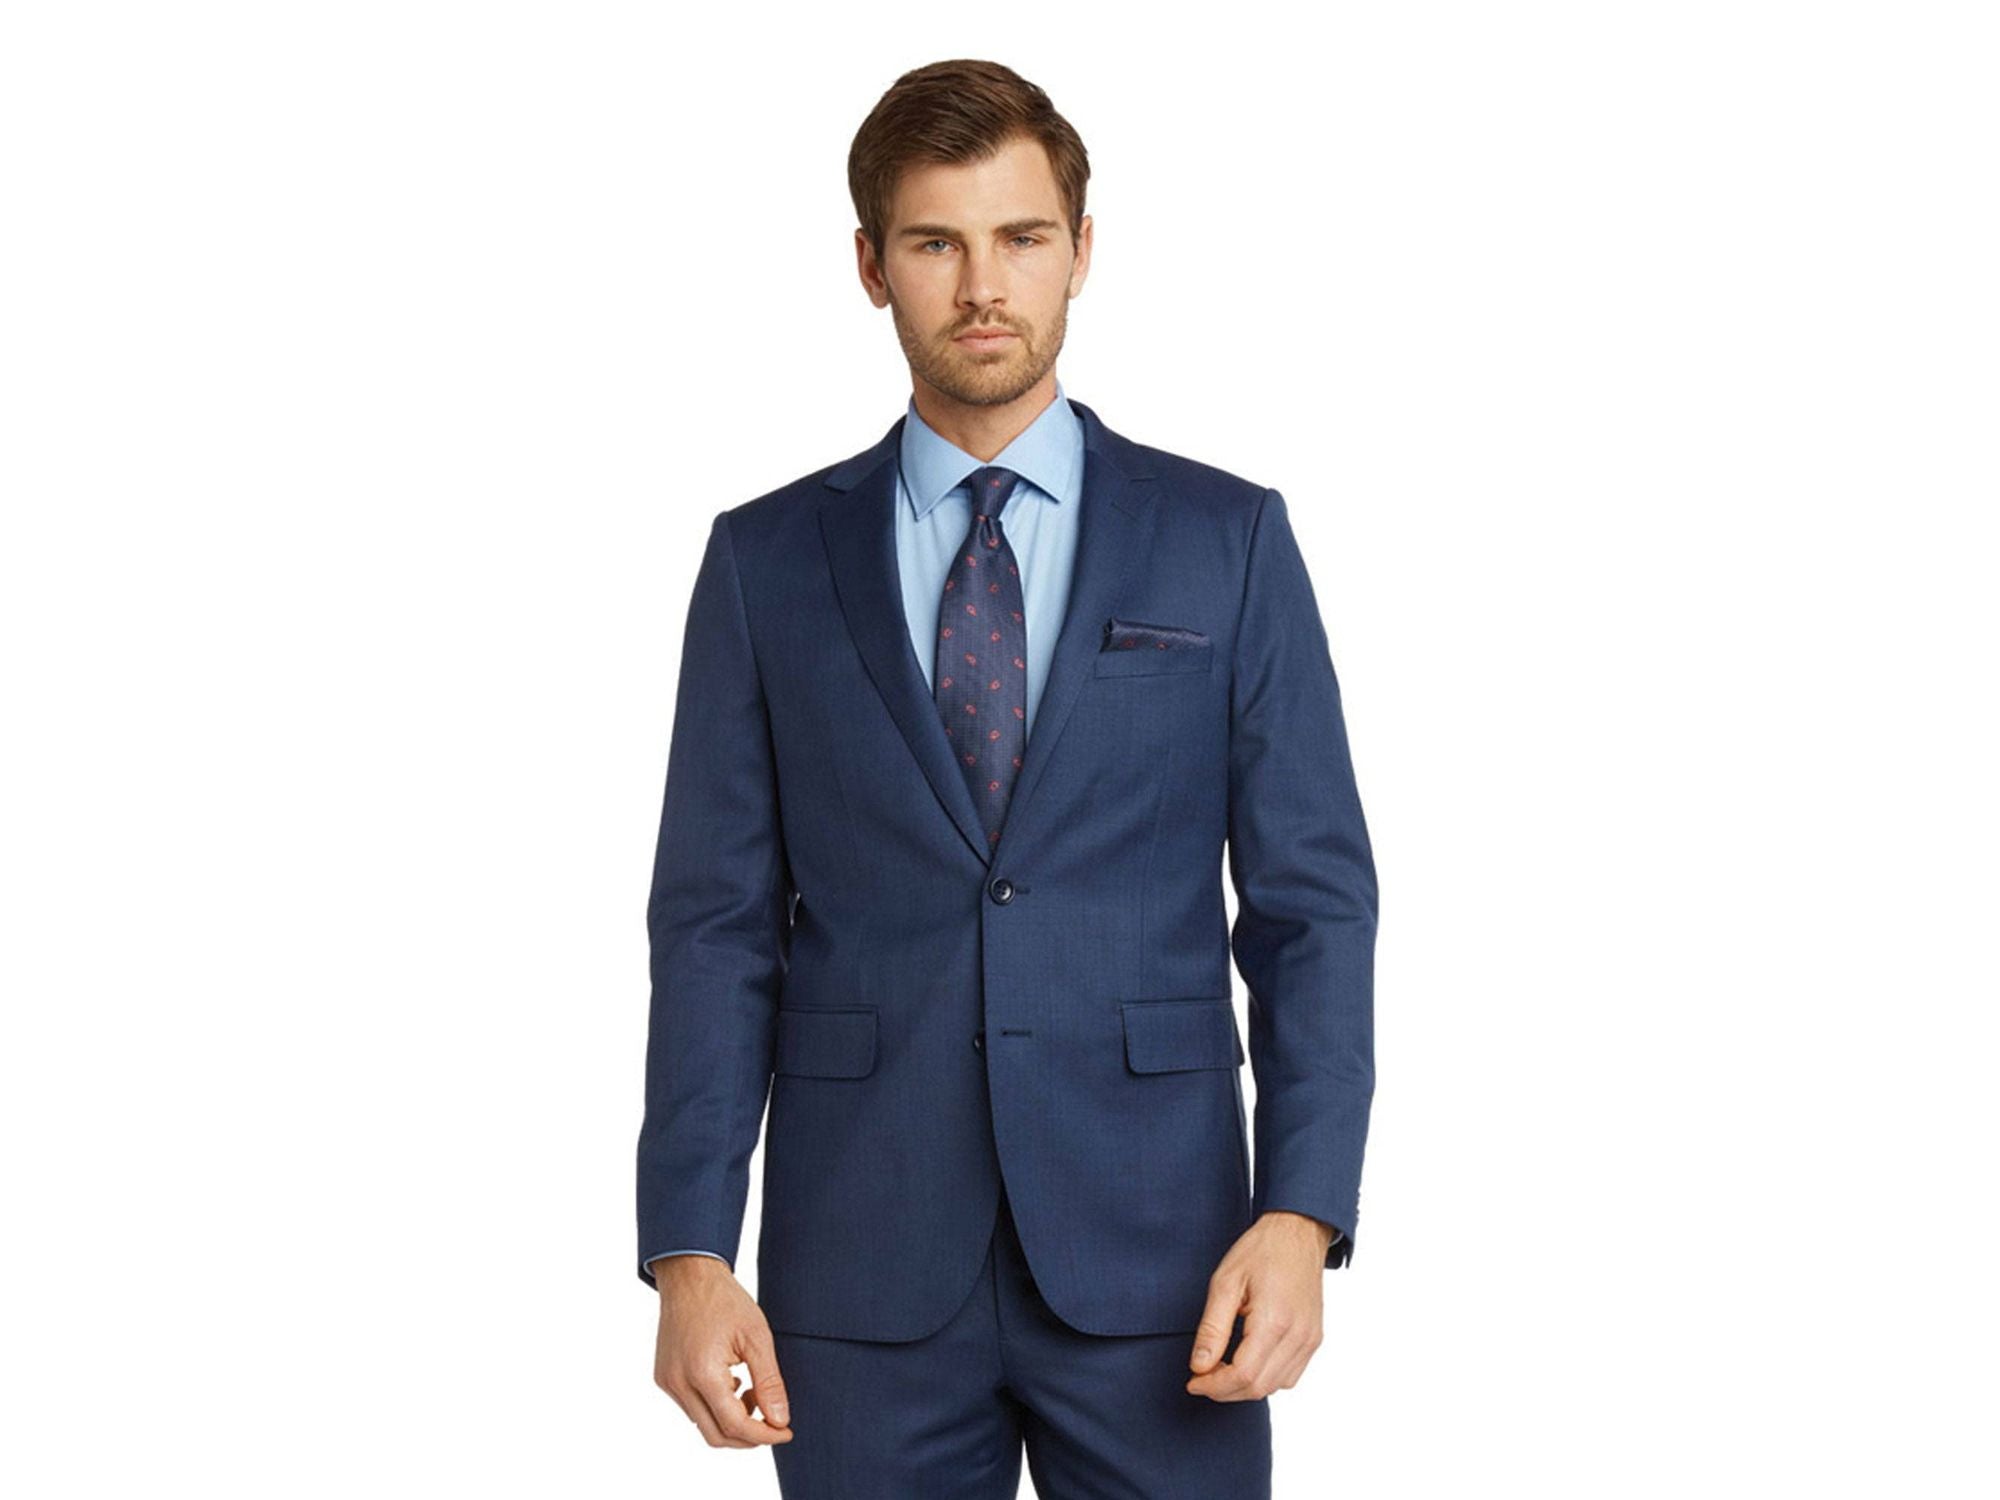 Modern Fit Sharkskin Suit in French Blue - Rainwater's Men's Clothing and Tuxedo Rental